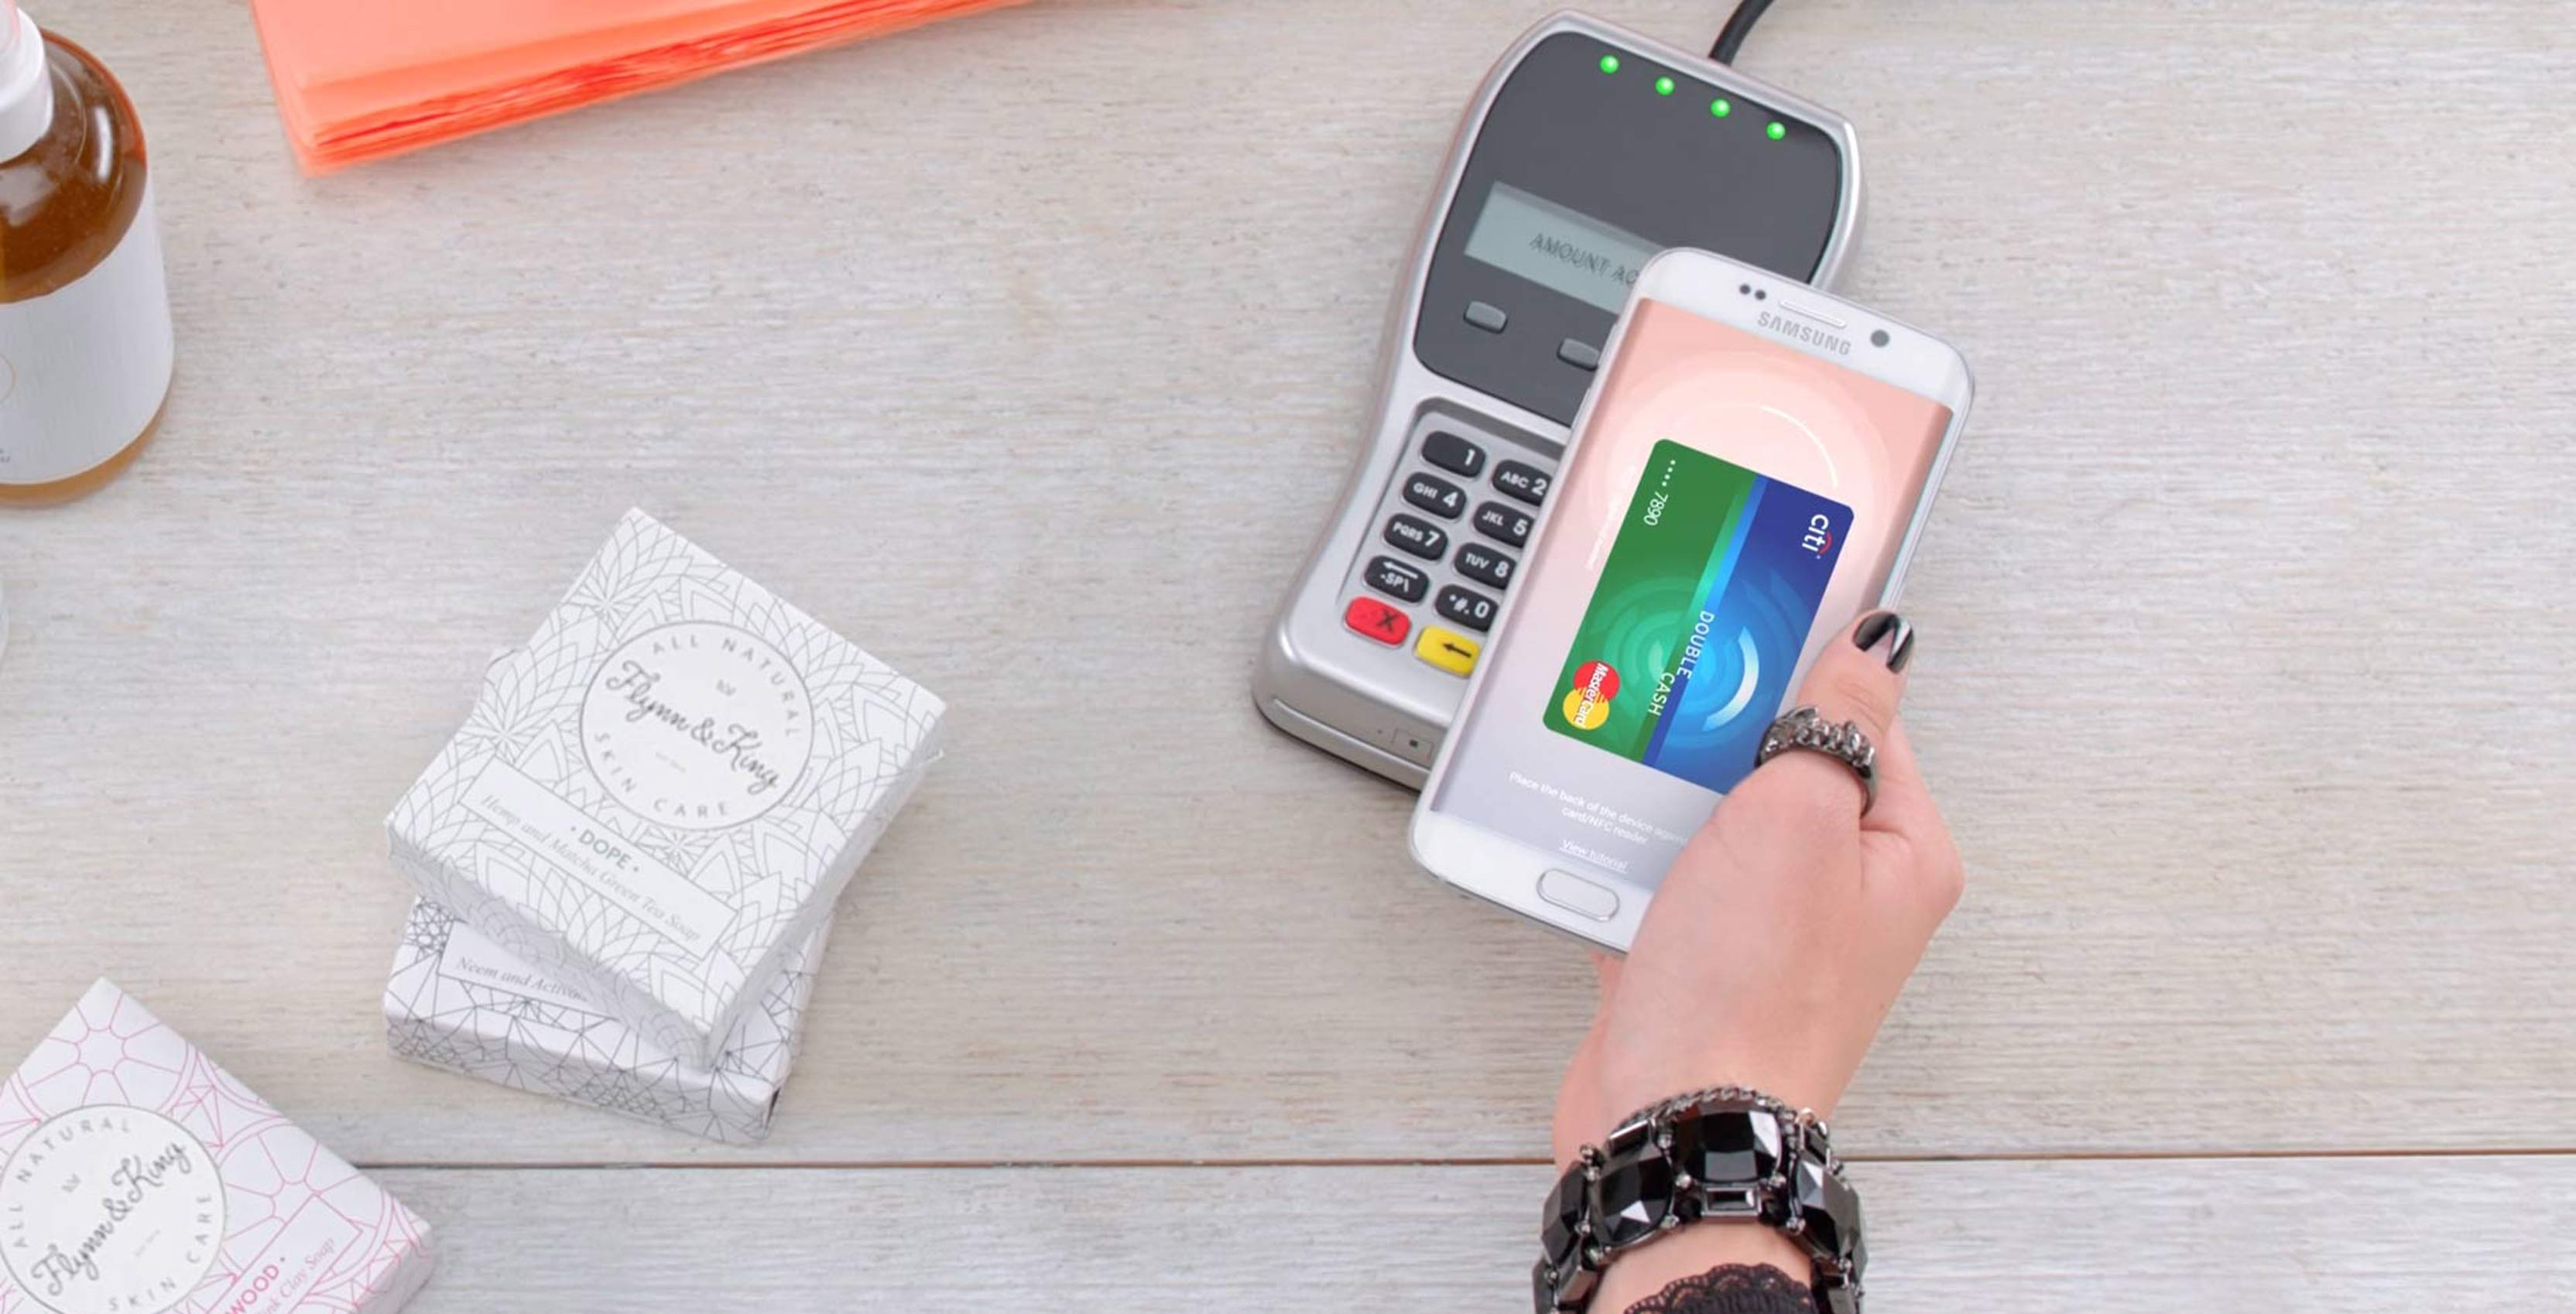 Samsung Pay now works with Scotiabank and ATB Financial, supports Interac